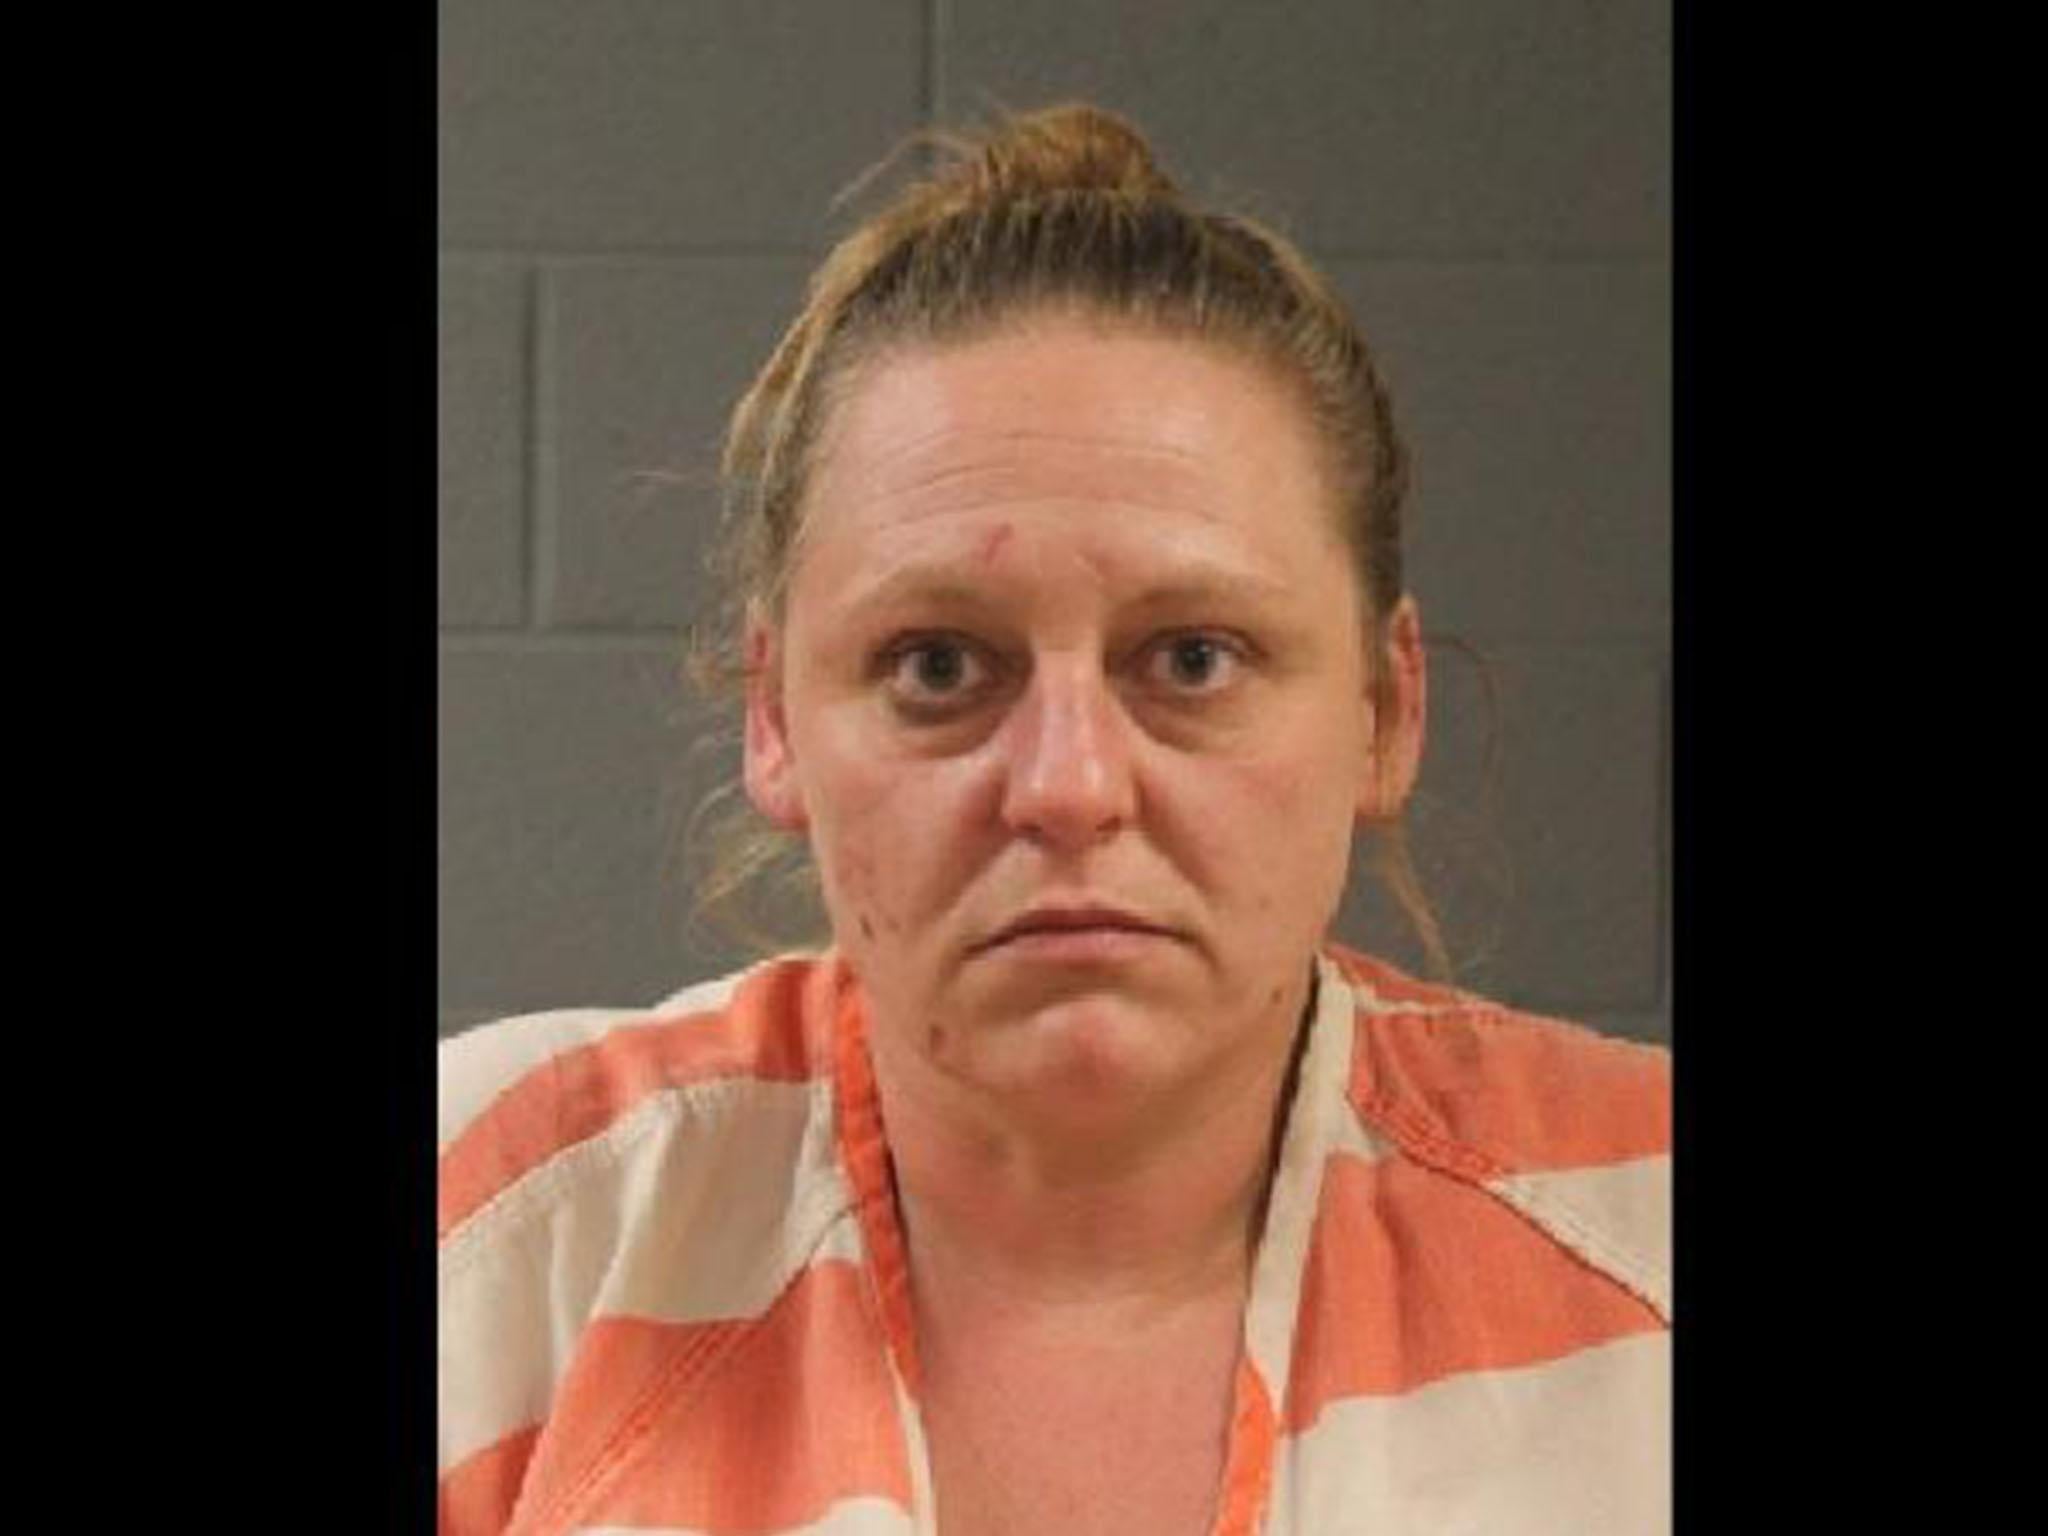 Brandy Jaynes, 36, allegedly locked her son in an upstairs bathroom for two years